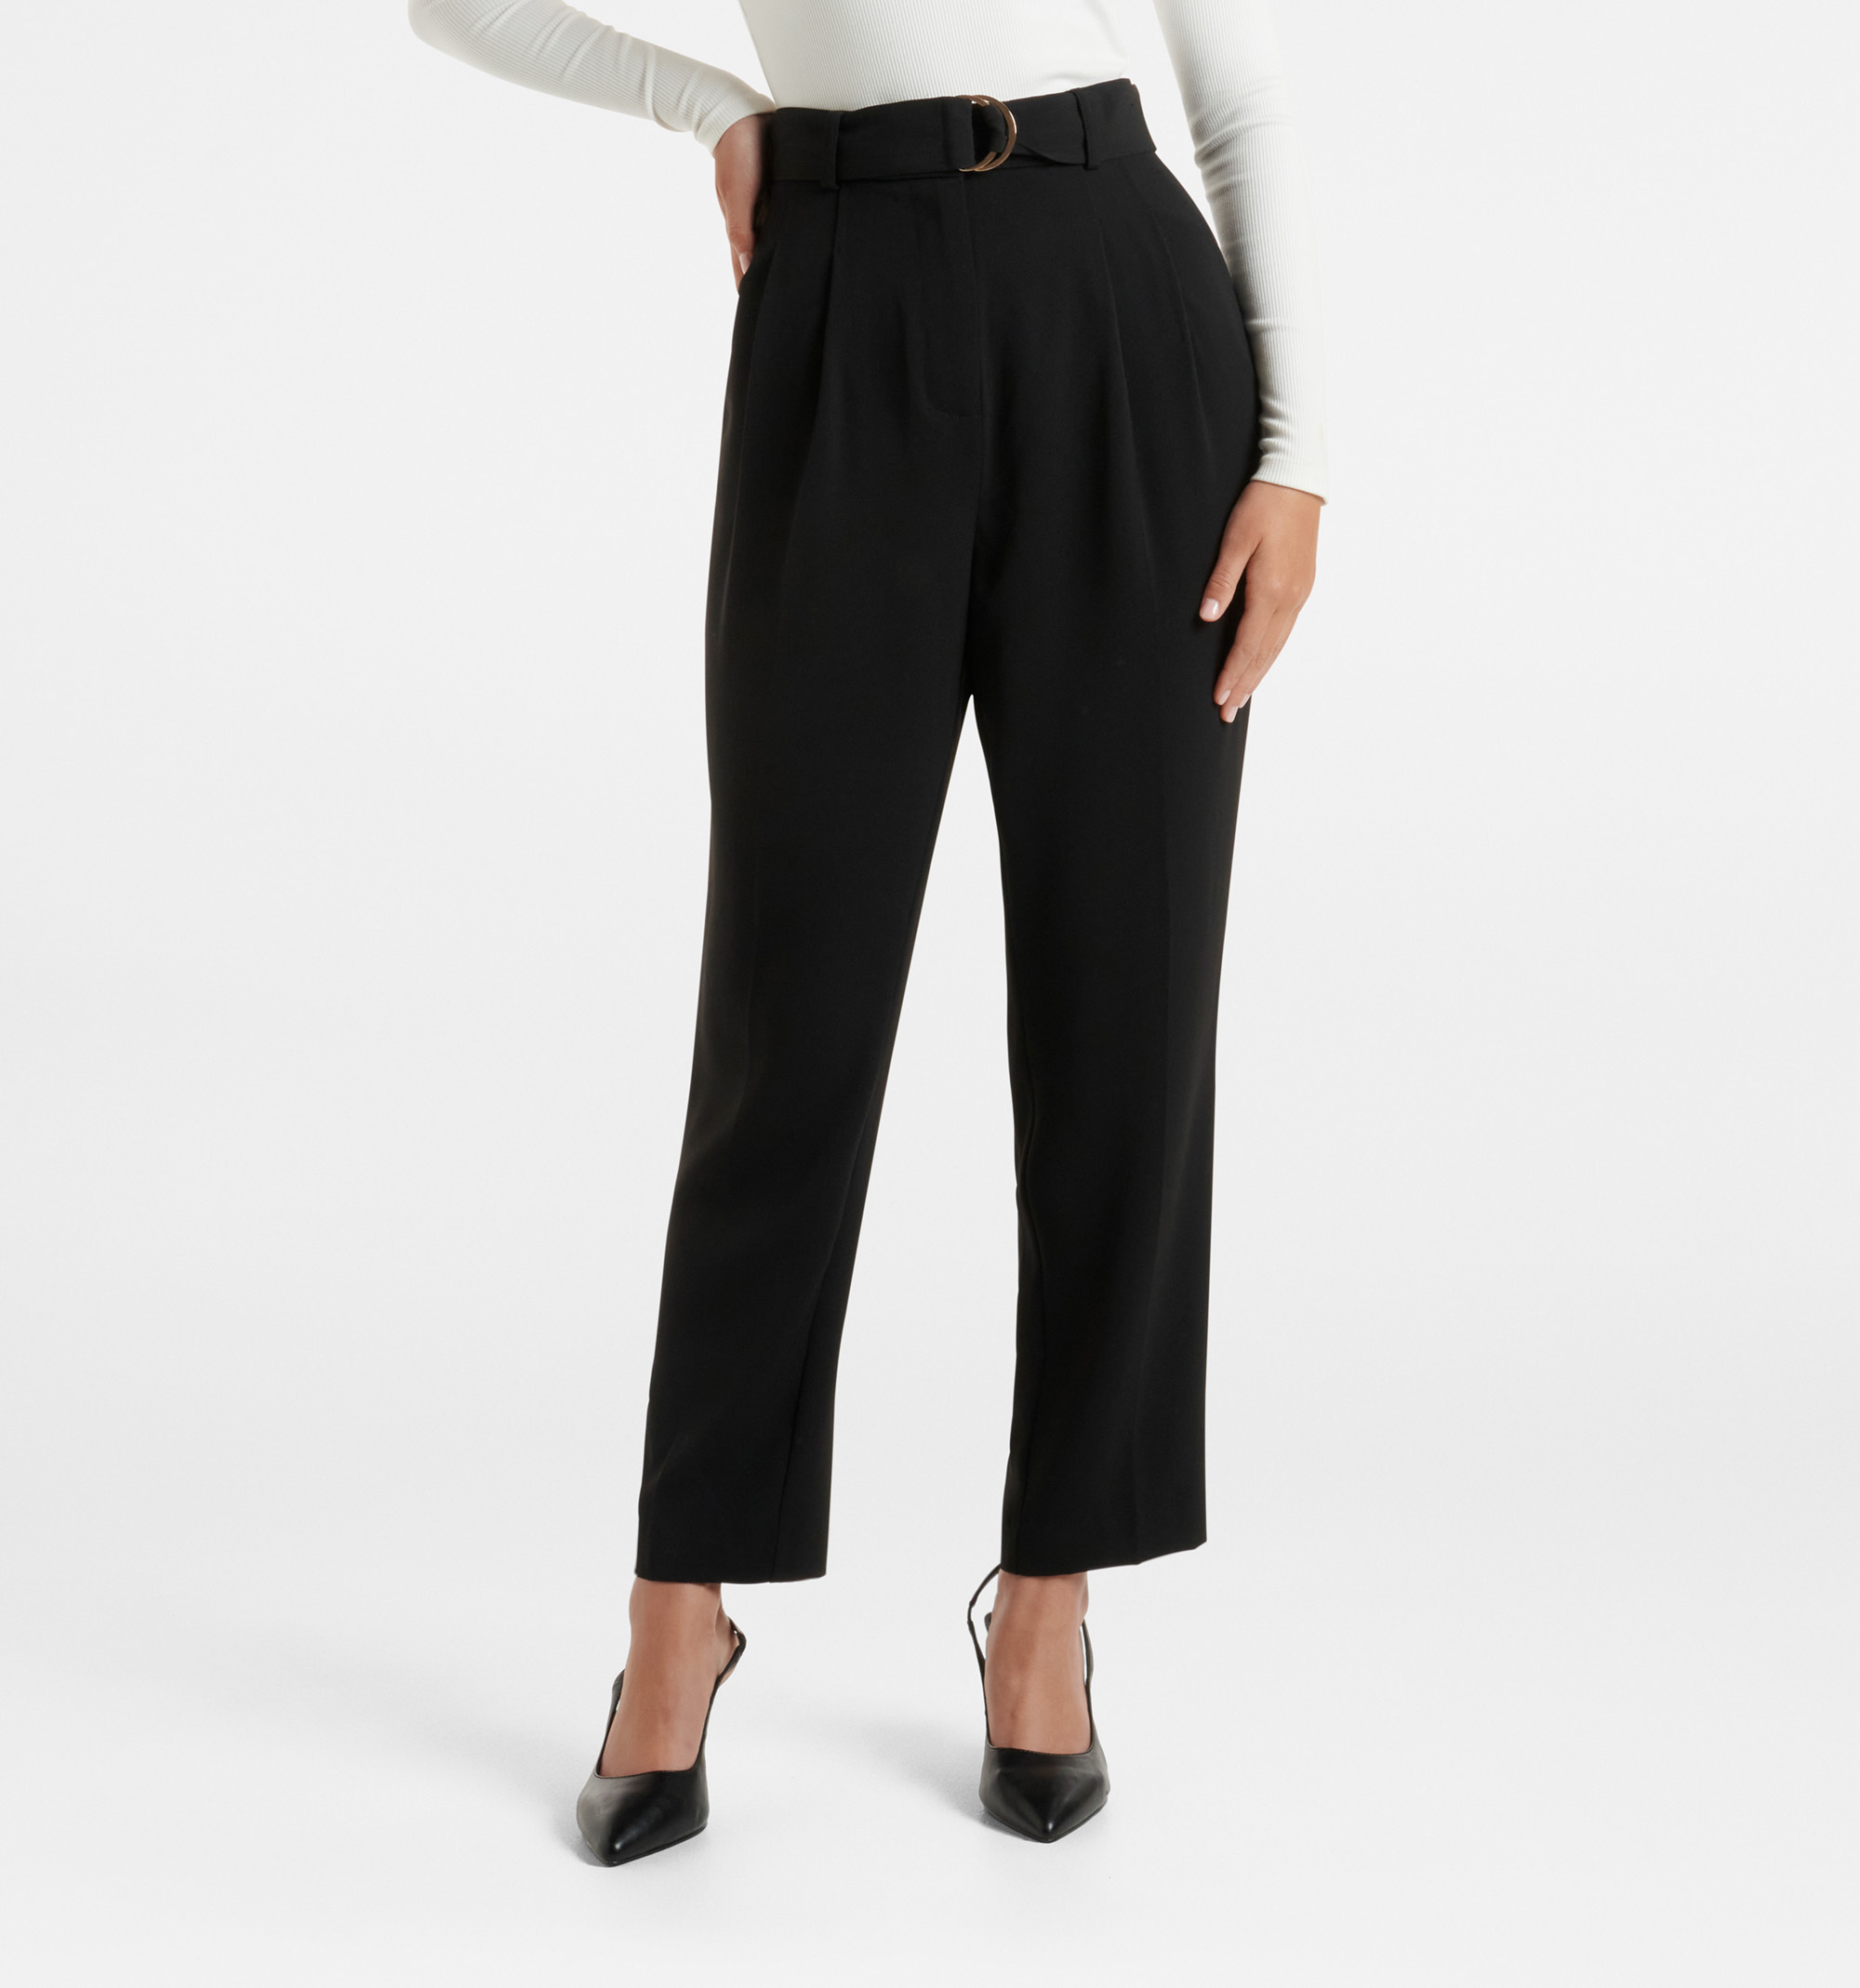 Buy Forever New Trousers & Lowers - Women | FASHIOLA INDIA